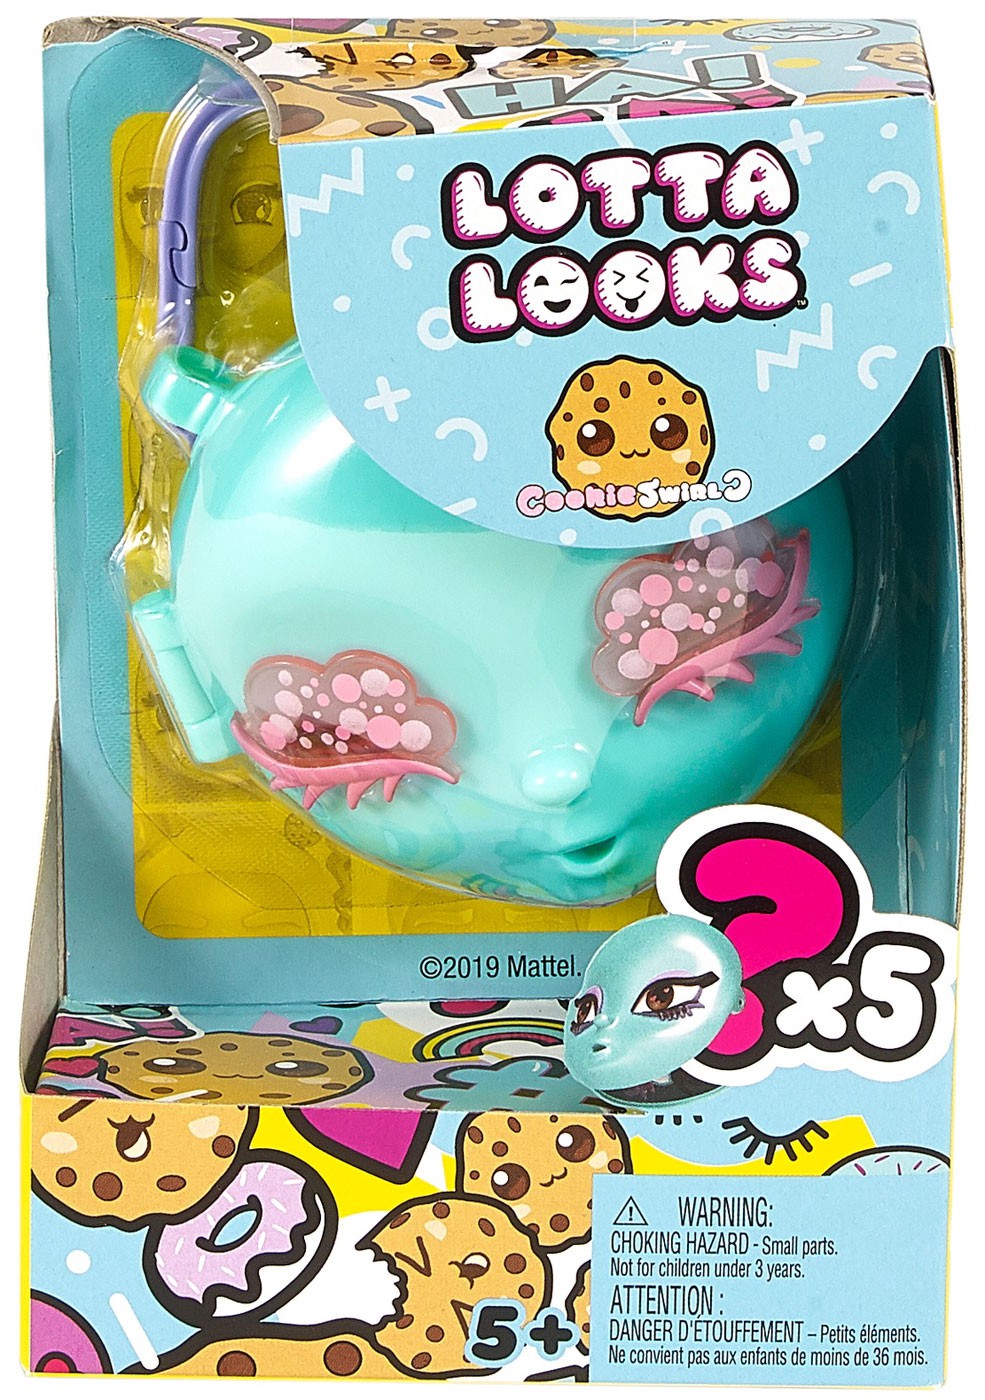 Multicolor Lotta Looks Mattel Cookie Swirl Donut Bunny Mood Pack with Plug//Play Pieces for Children